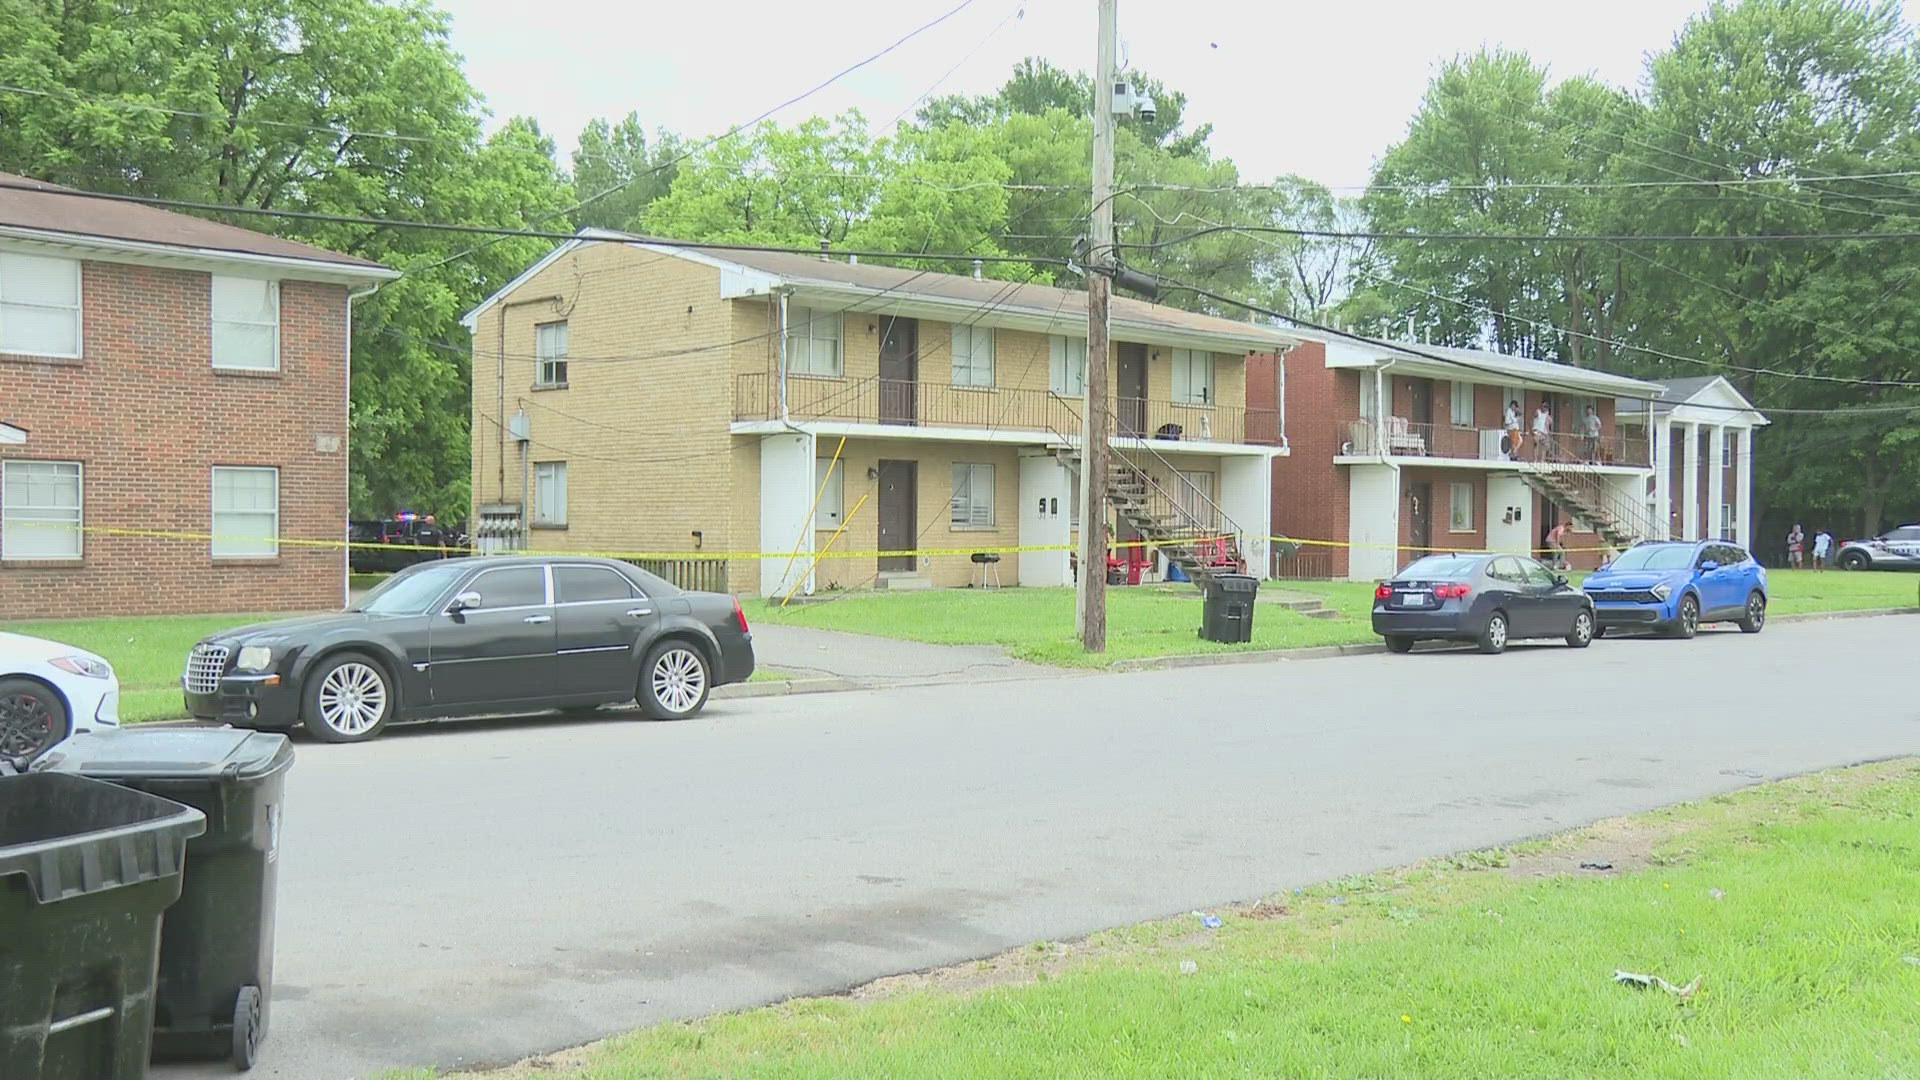 Police are searching for a suspect after a man was shot and killed in the 3600 block of Georgetown Place on Saturday.